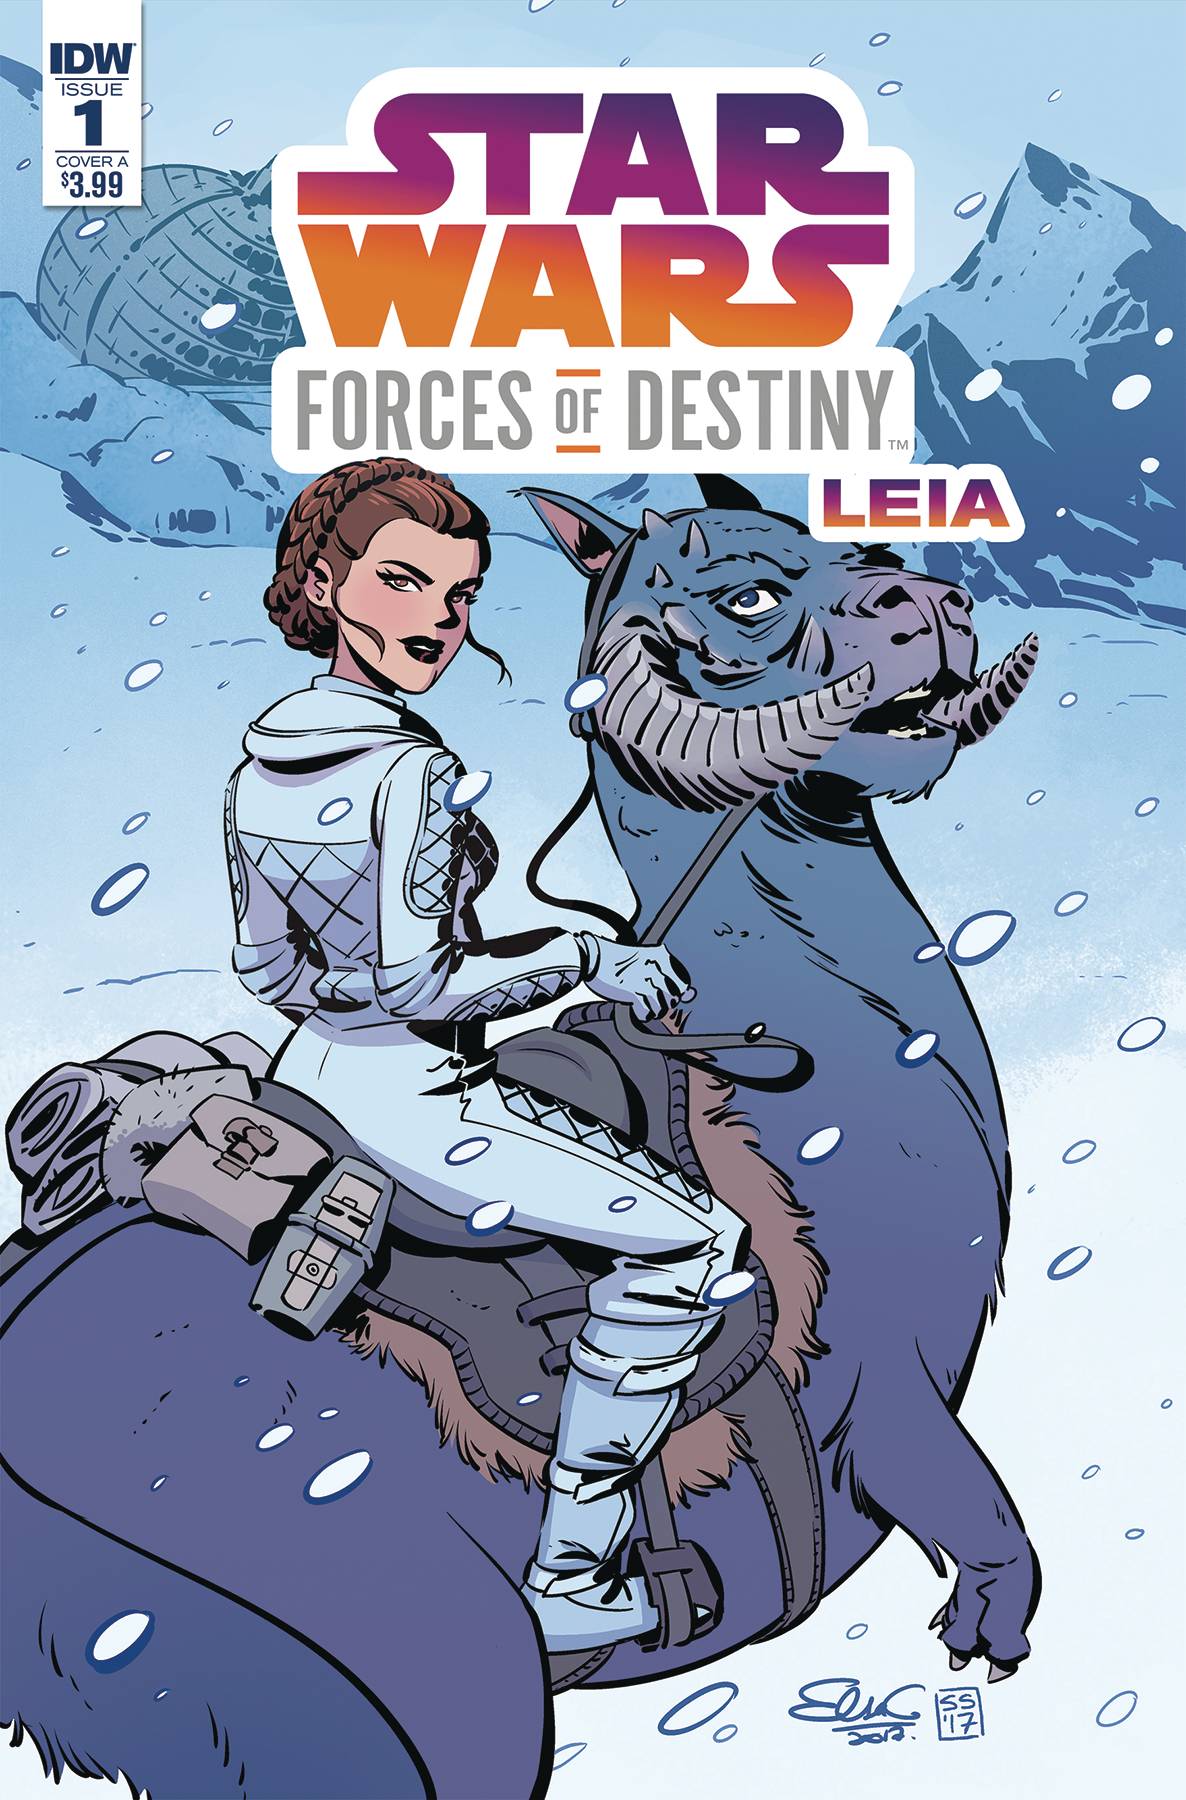 Star Wars Adventure Forces of Destiny Leia #1 Cover A